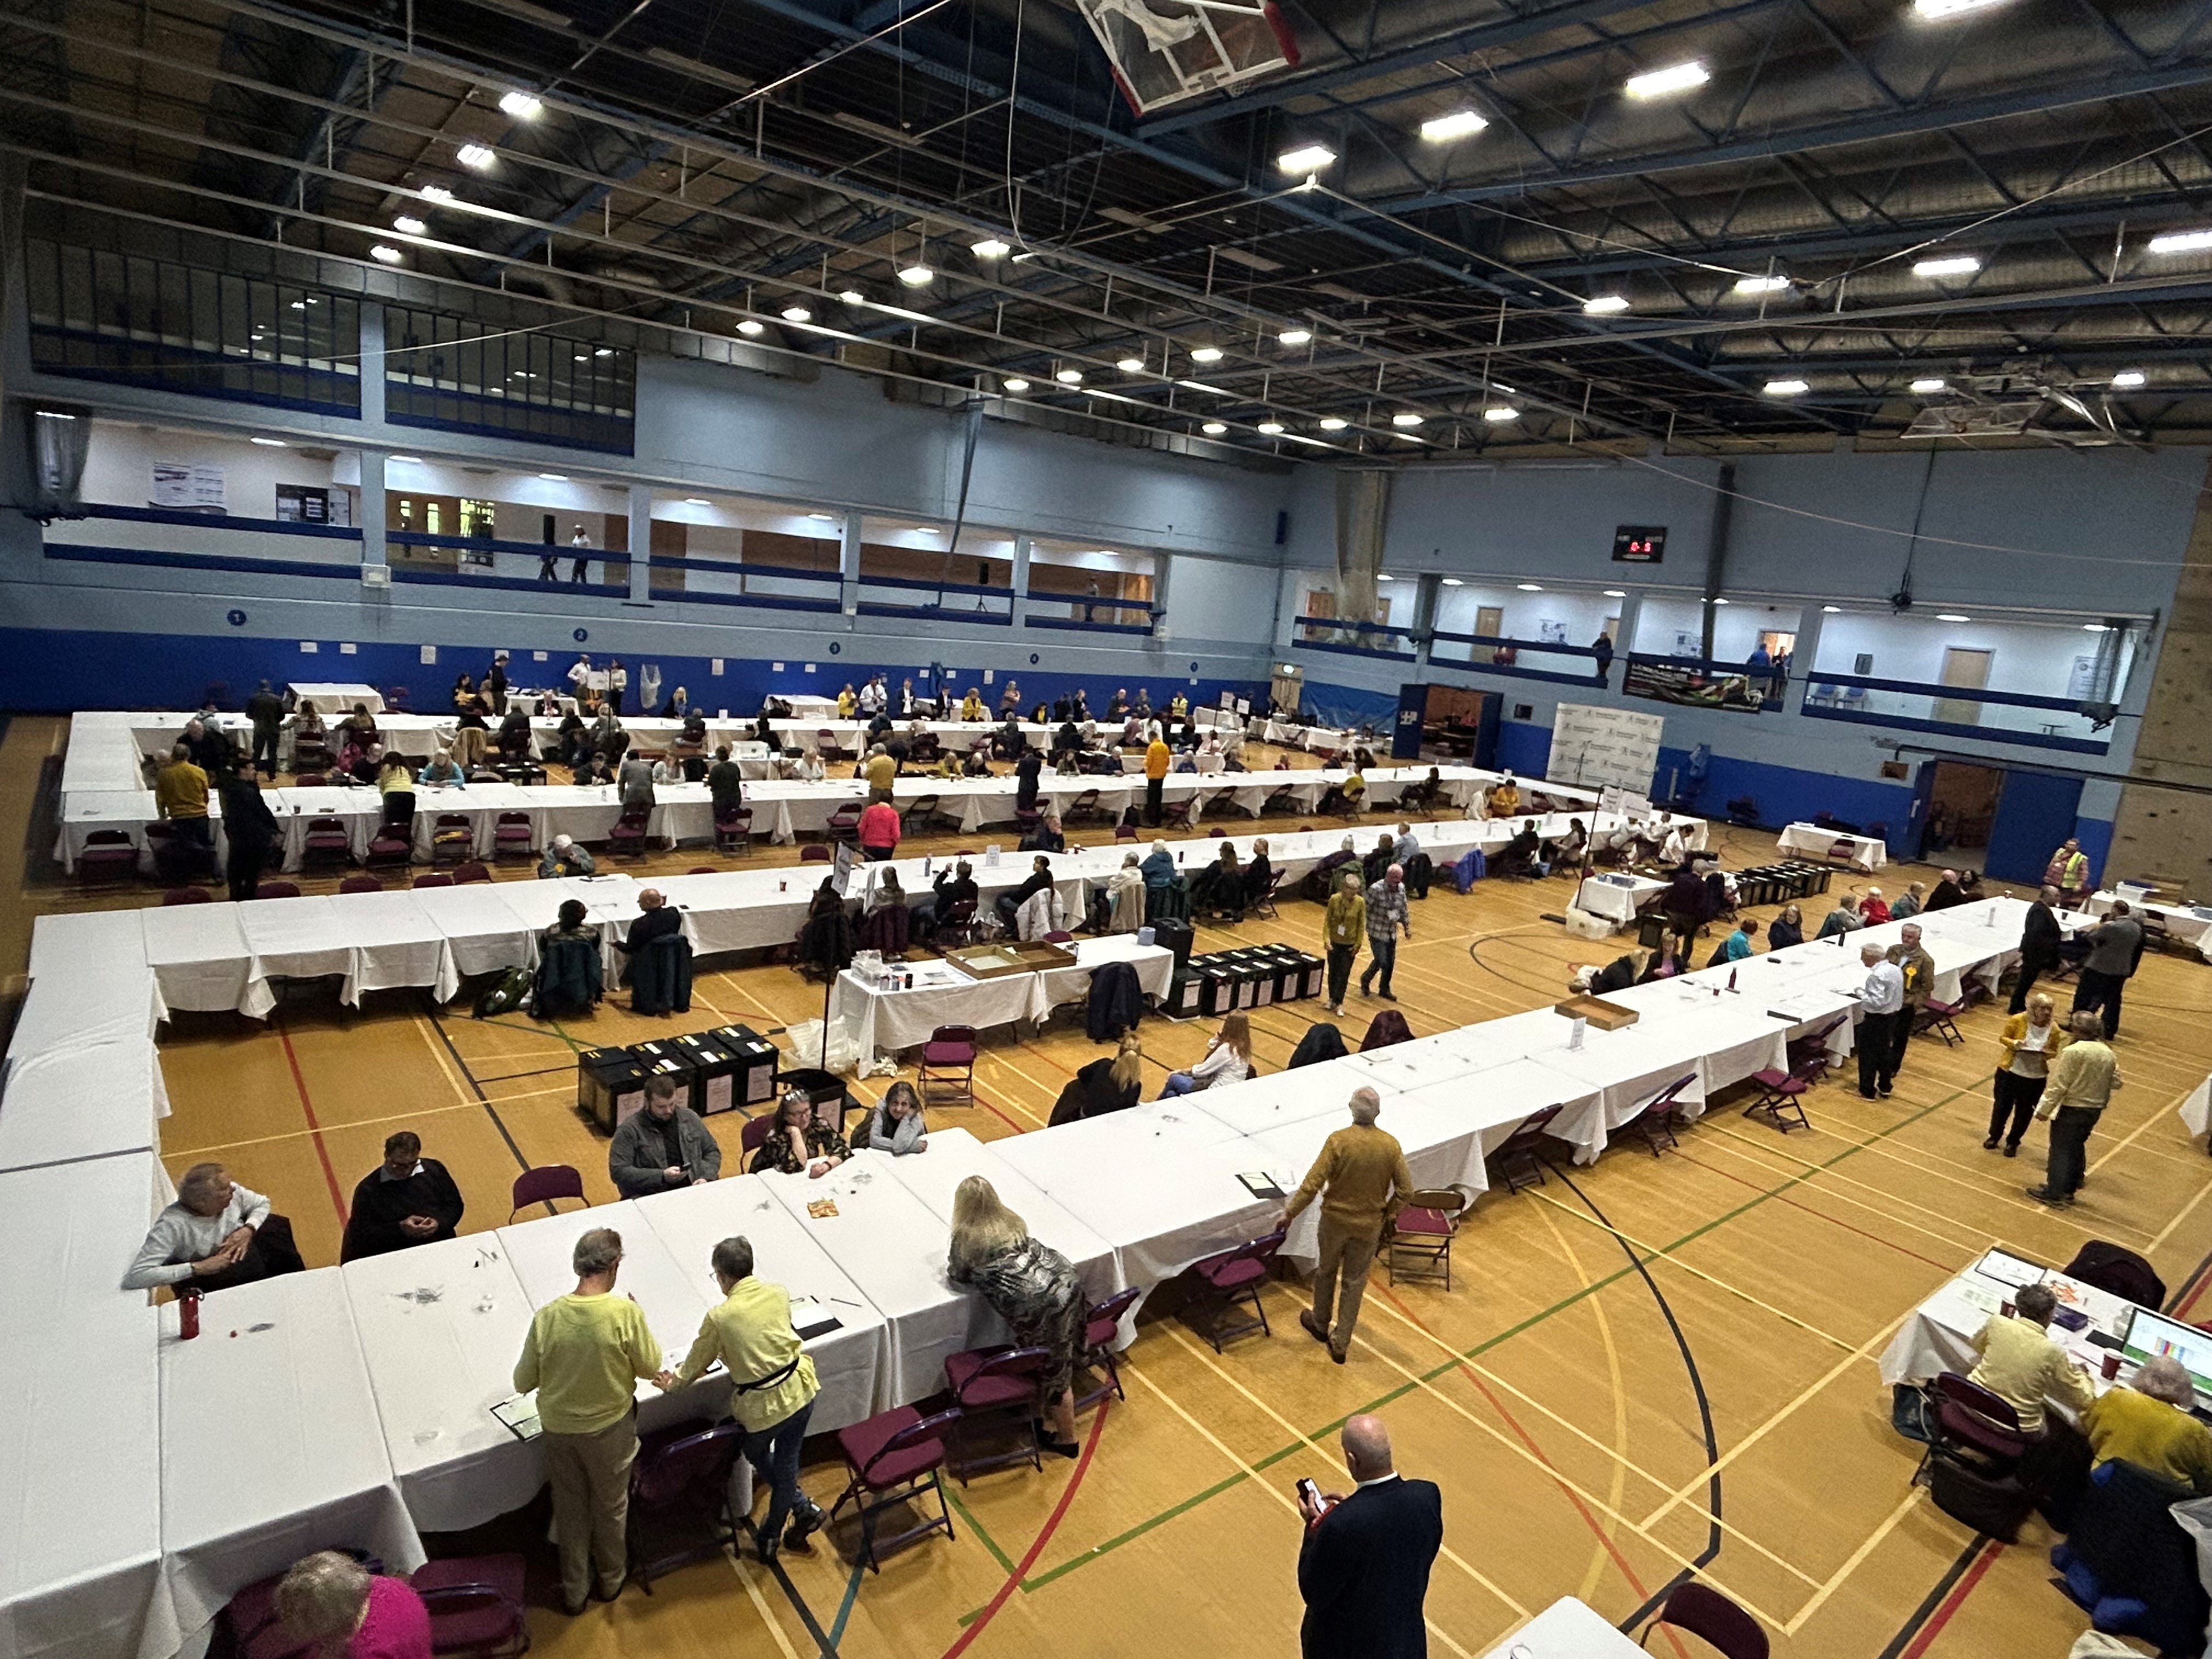 Elevated view of the Woking Borough election council